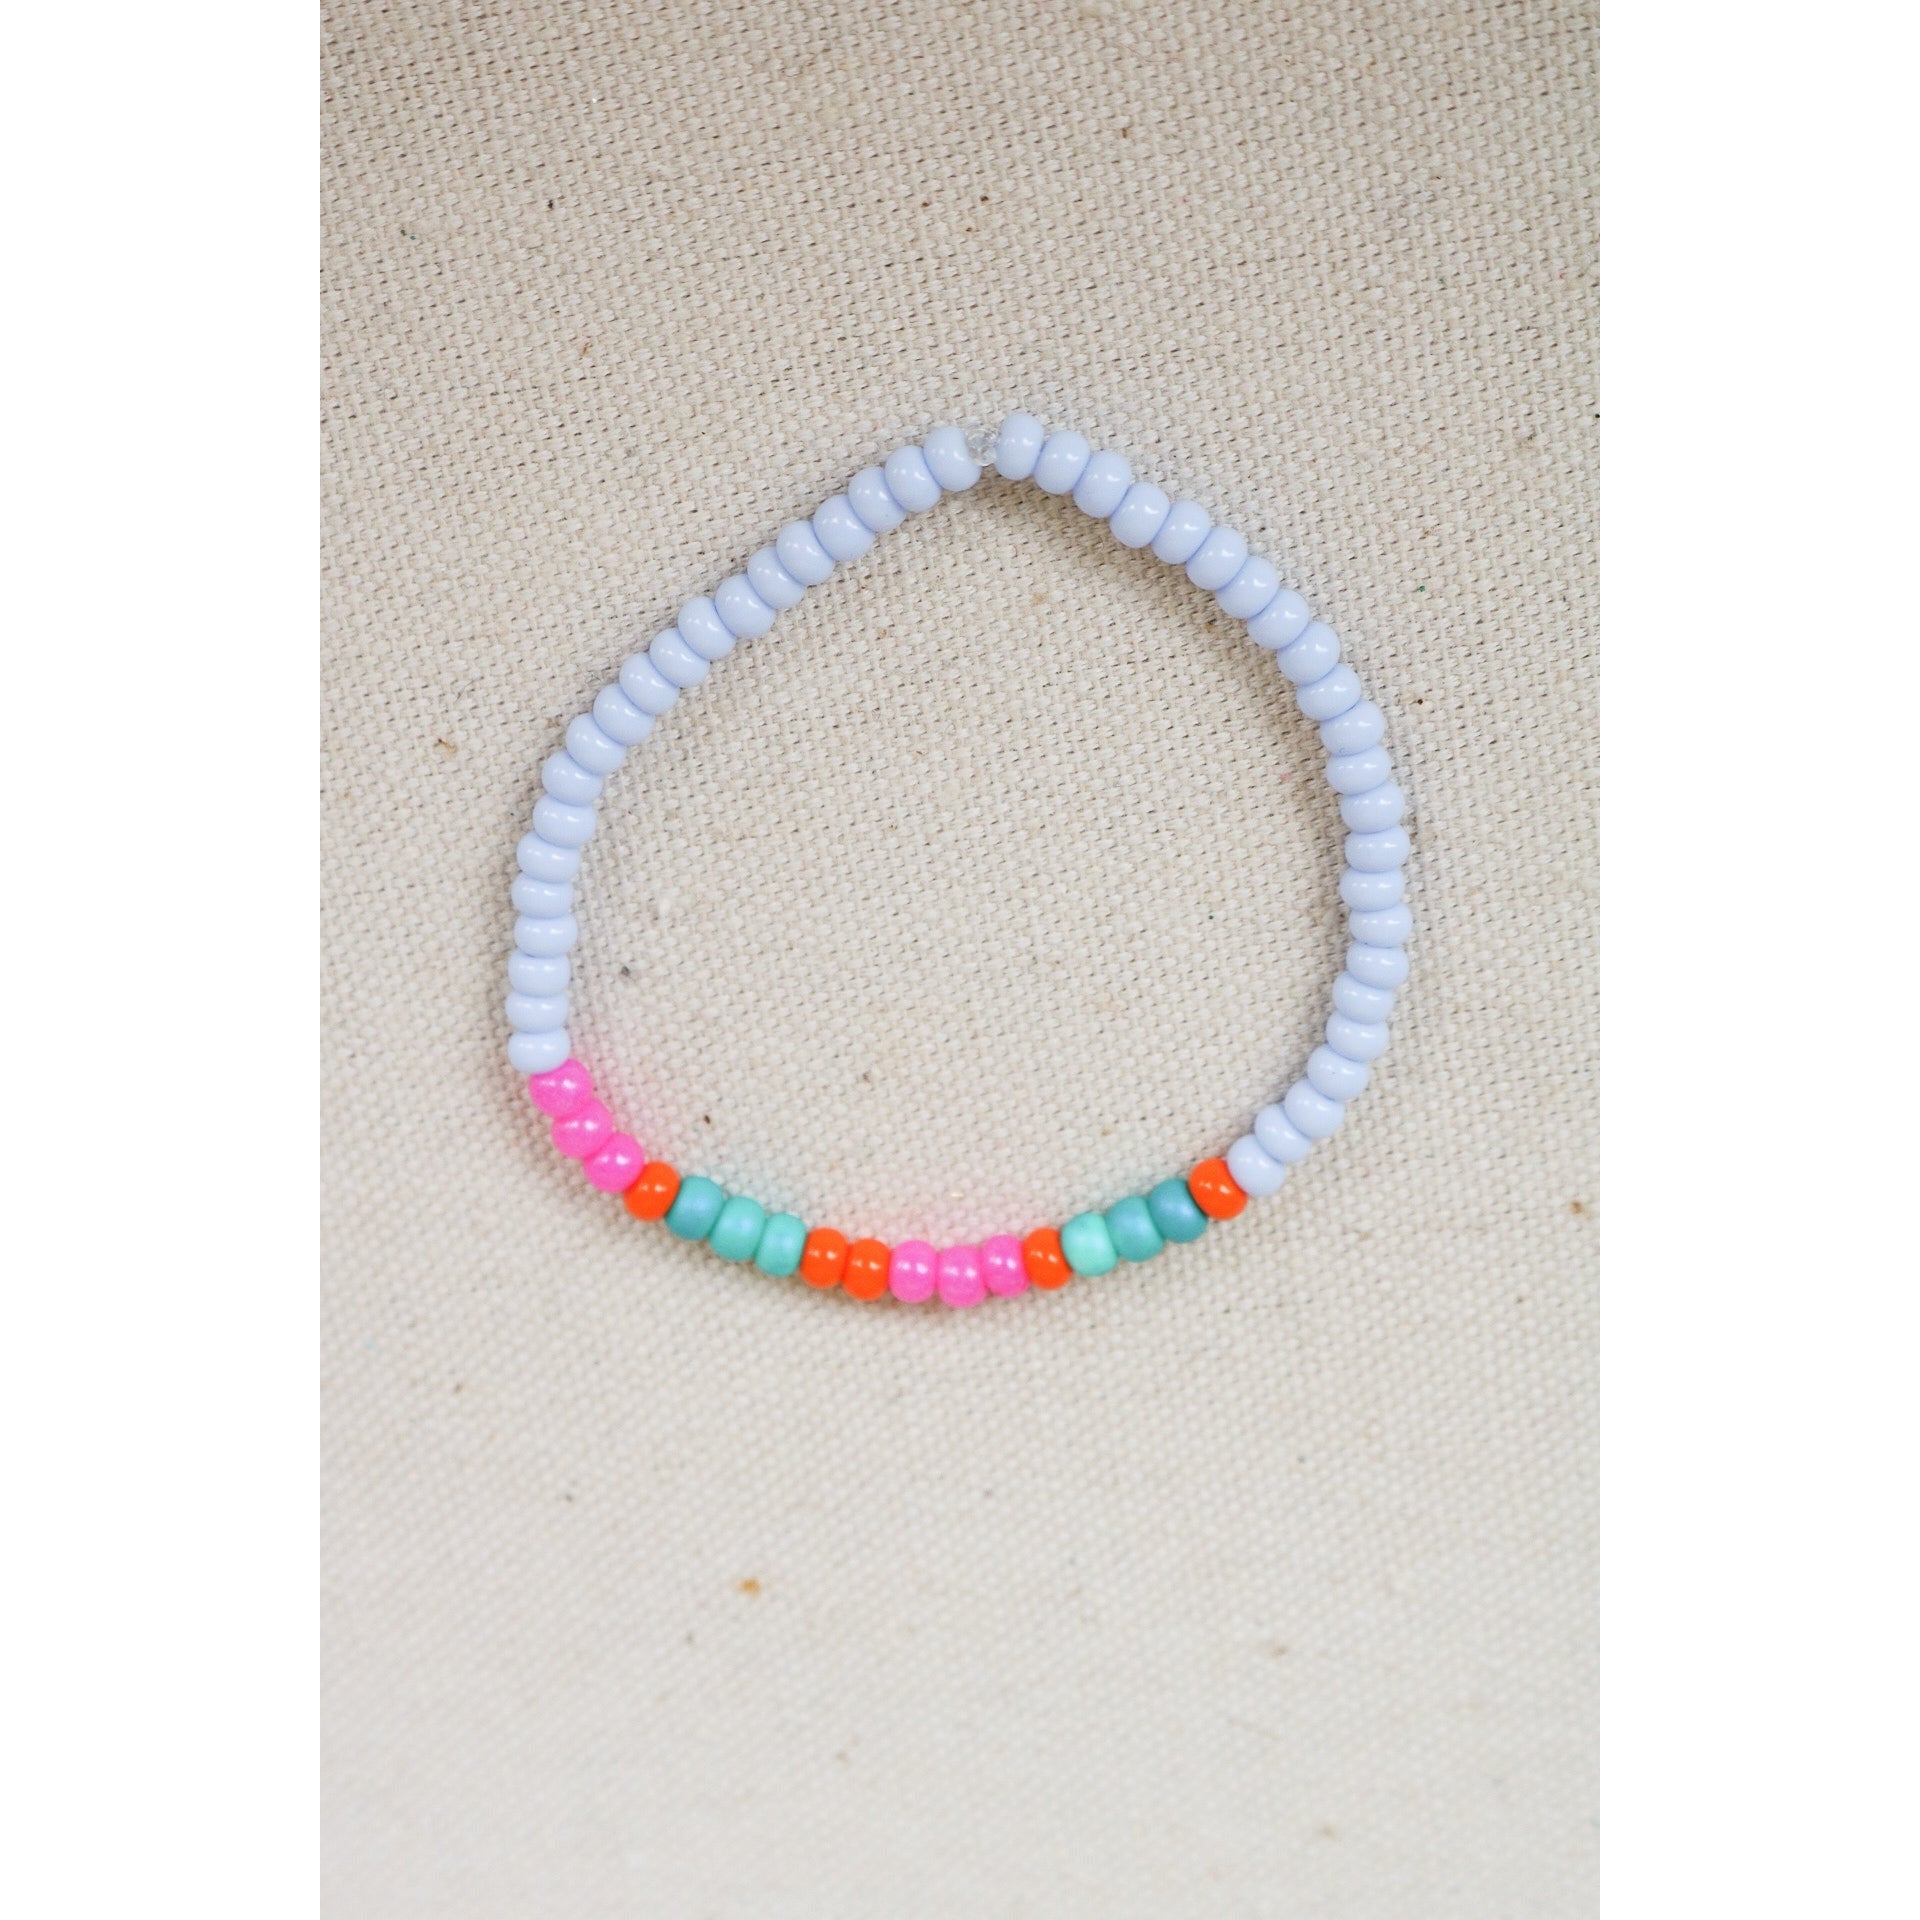 the Morse code seed bead bracelet with the letters N F E symbolic of the phrase 